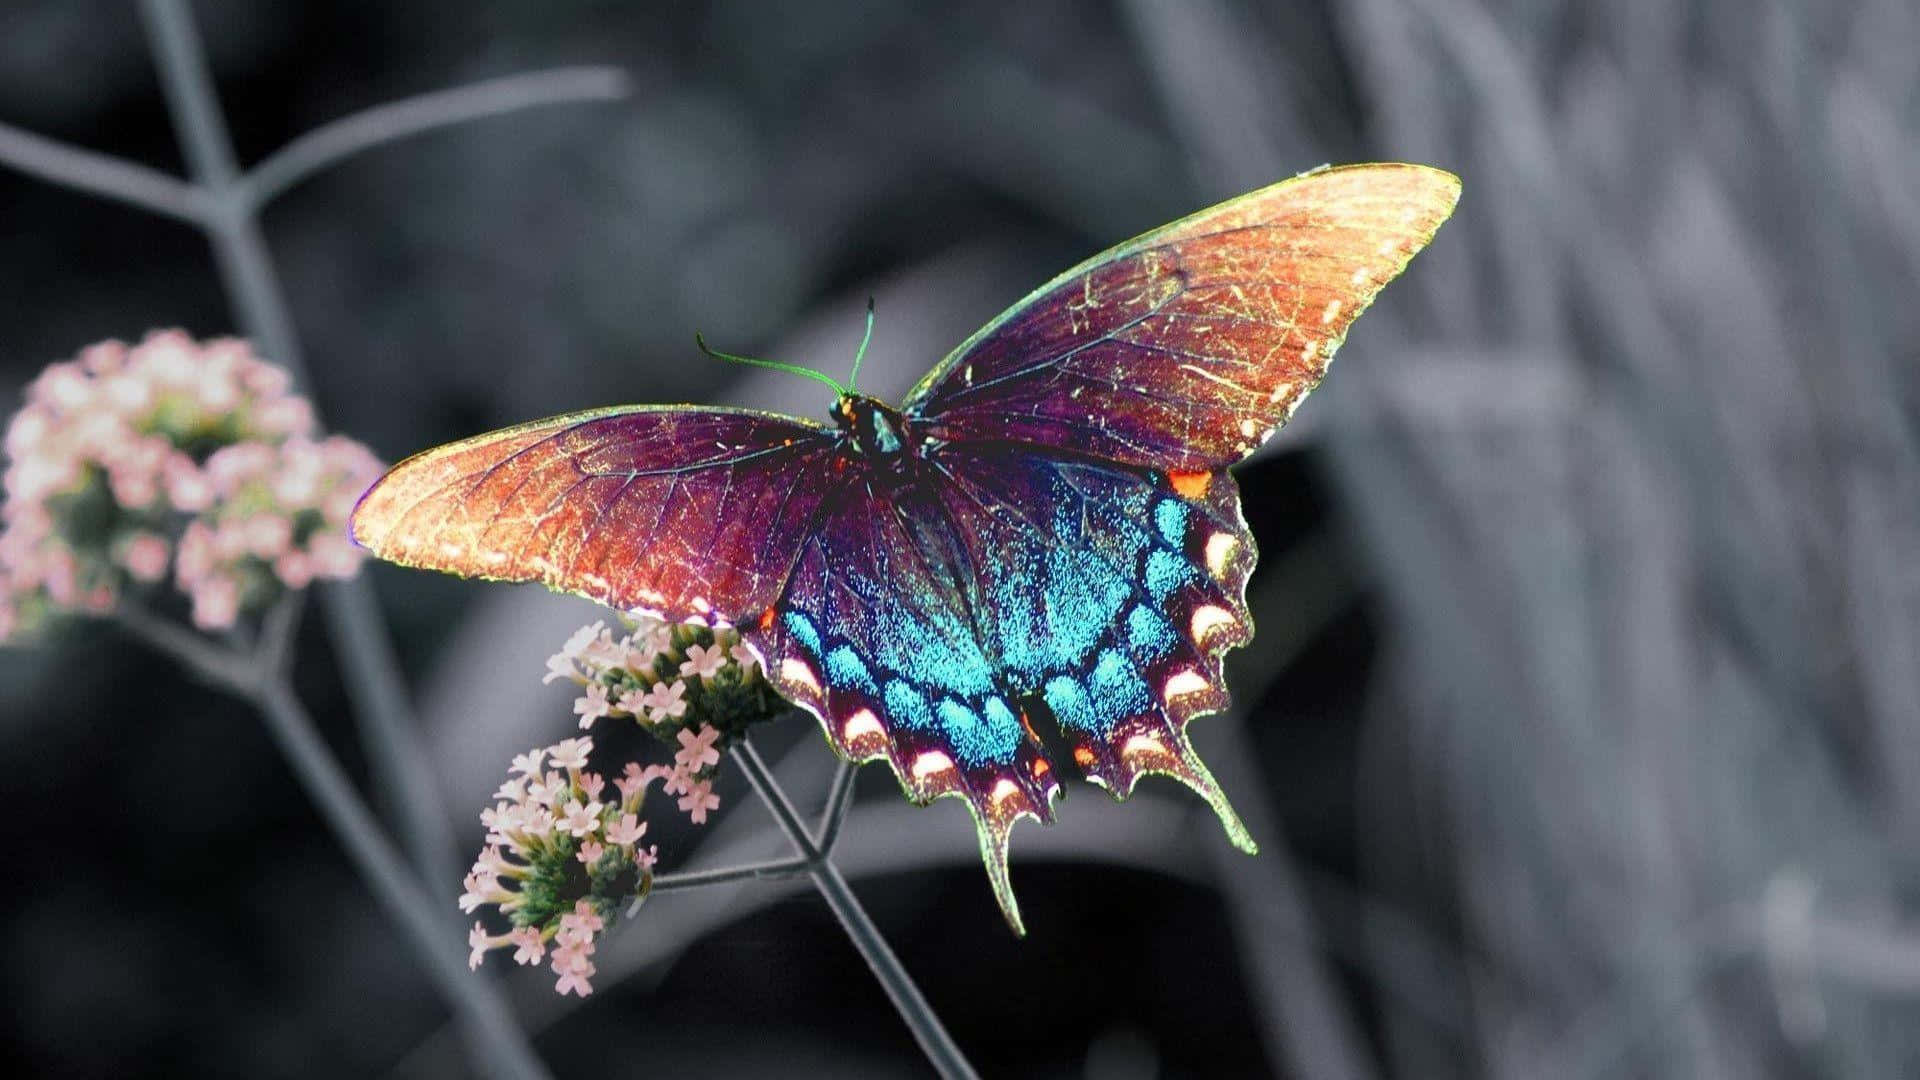 Colorful butterfly exploring a flower in nature Wallpaper